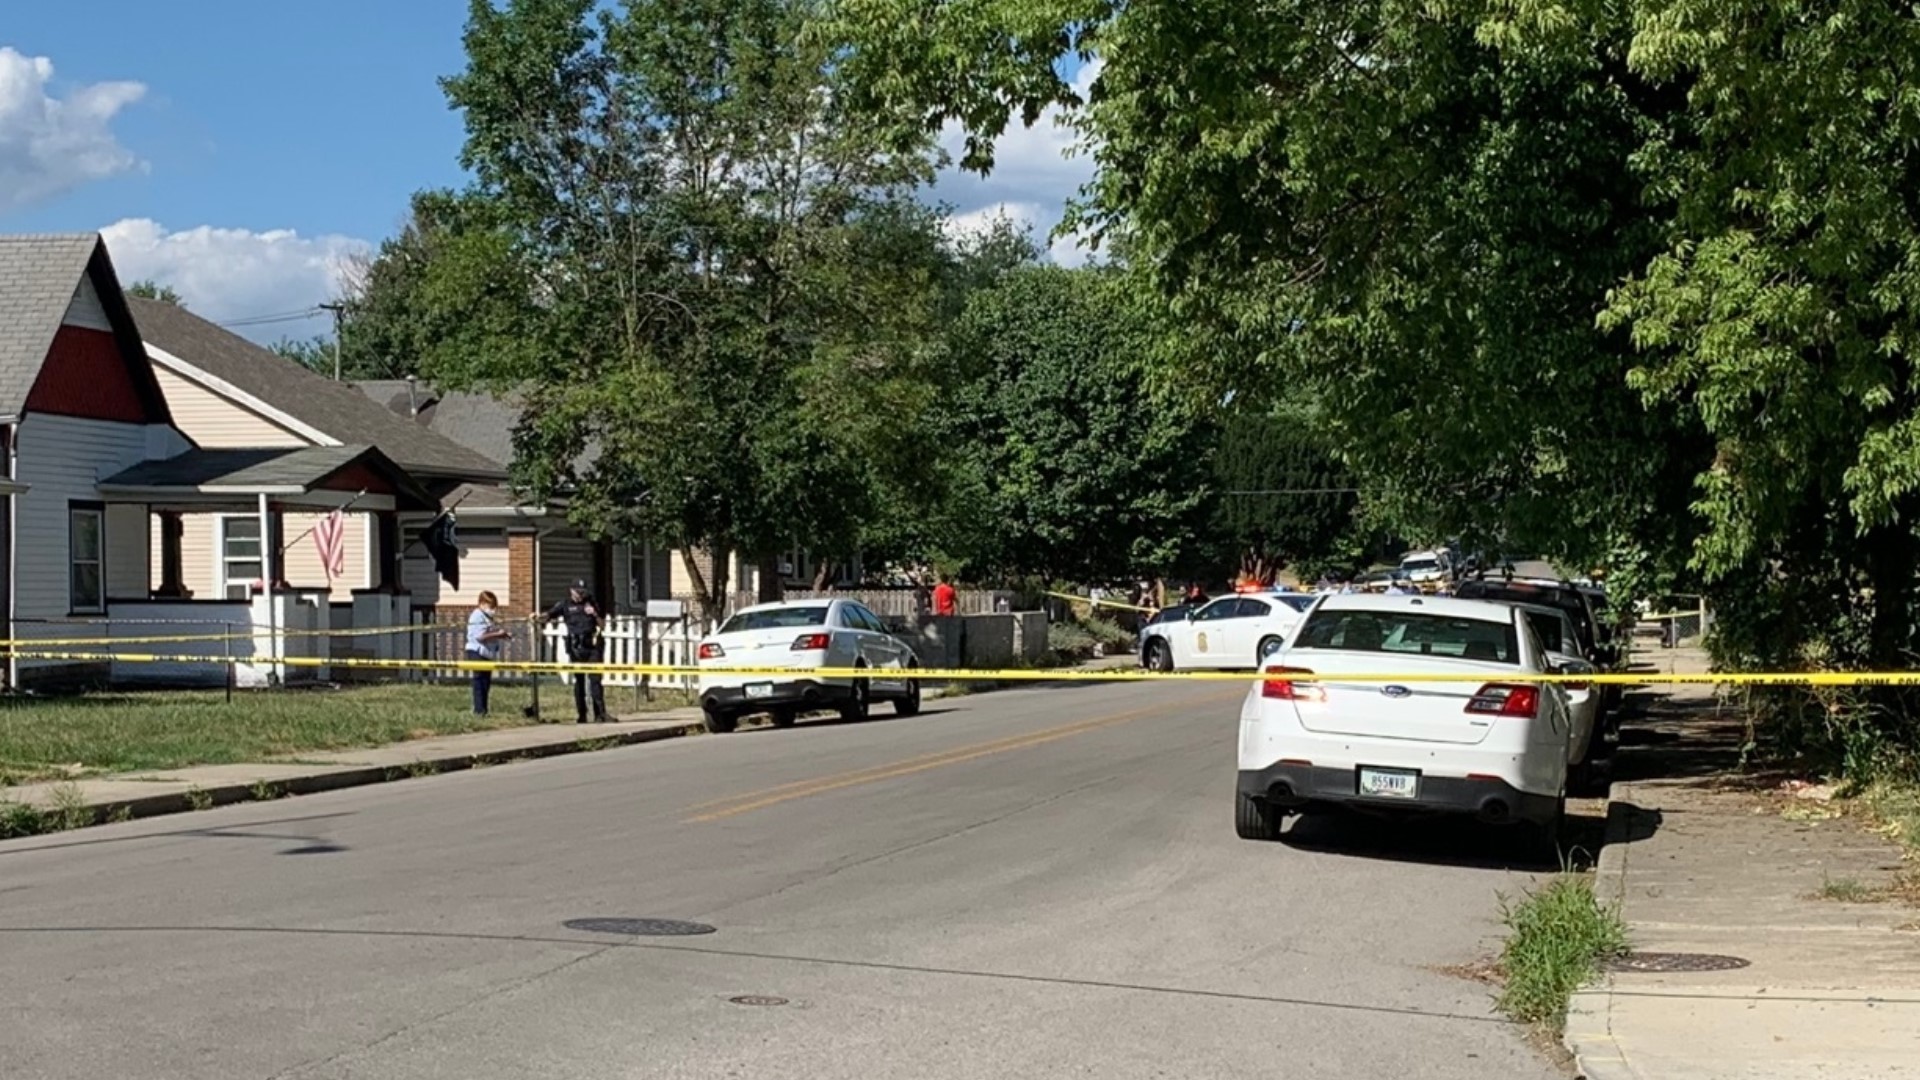 Police said the shooting happened around 5 p.m. in the 1800 block of Brookside Avenue.